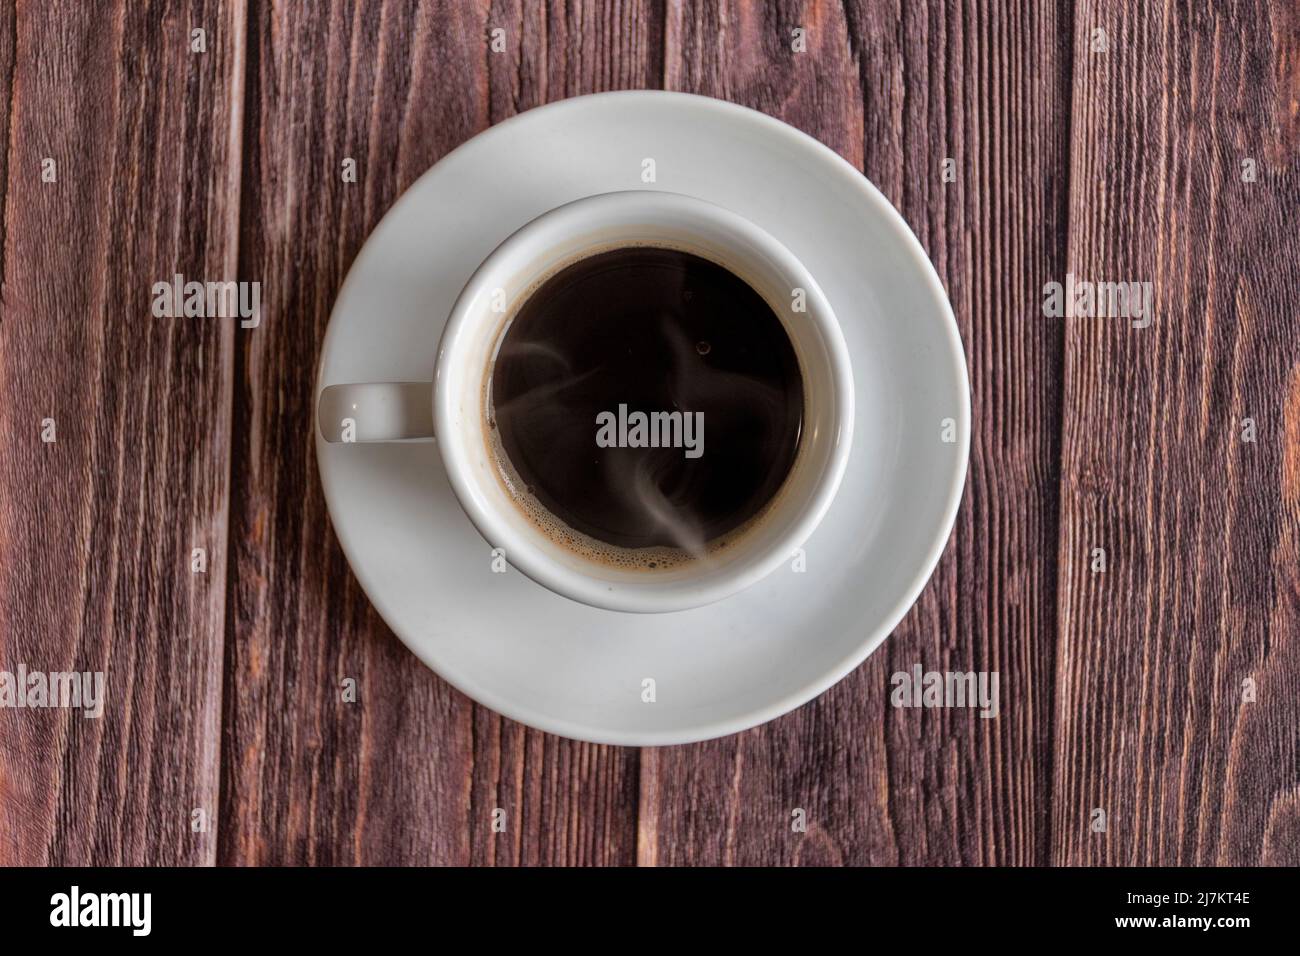 A cup of coffee Stock Photo